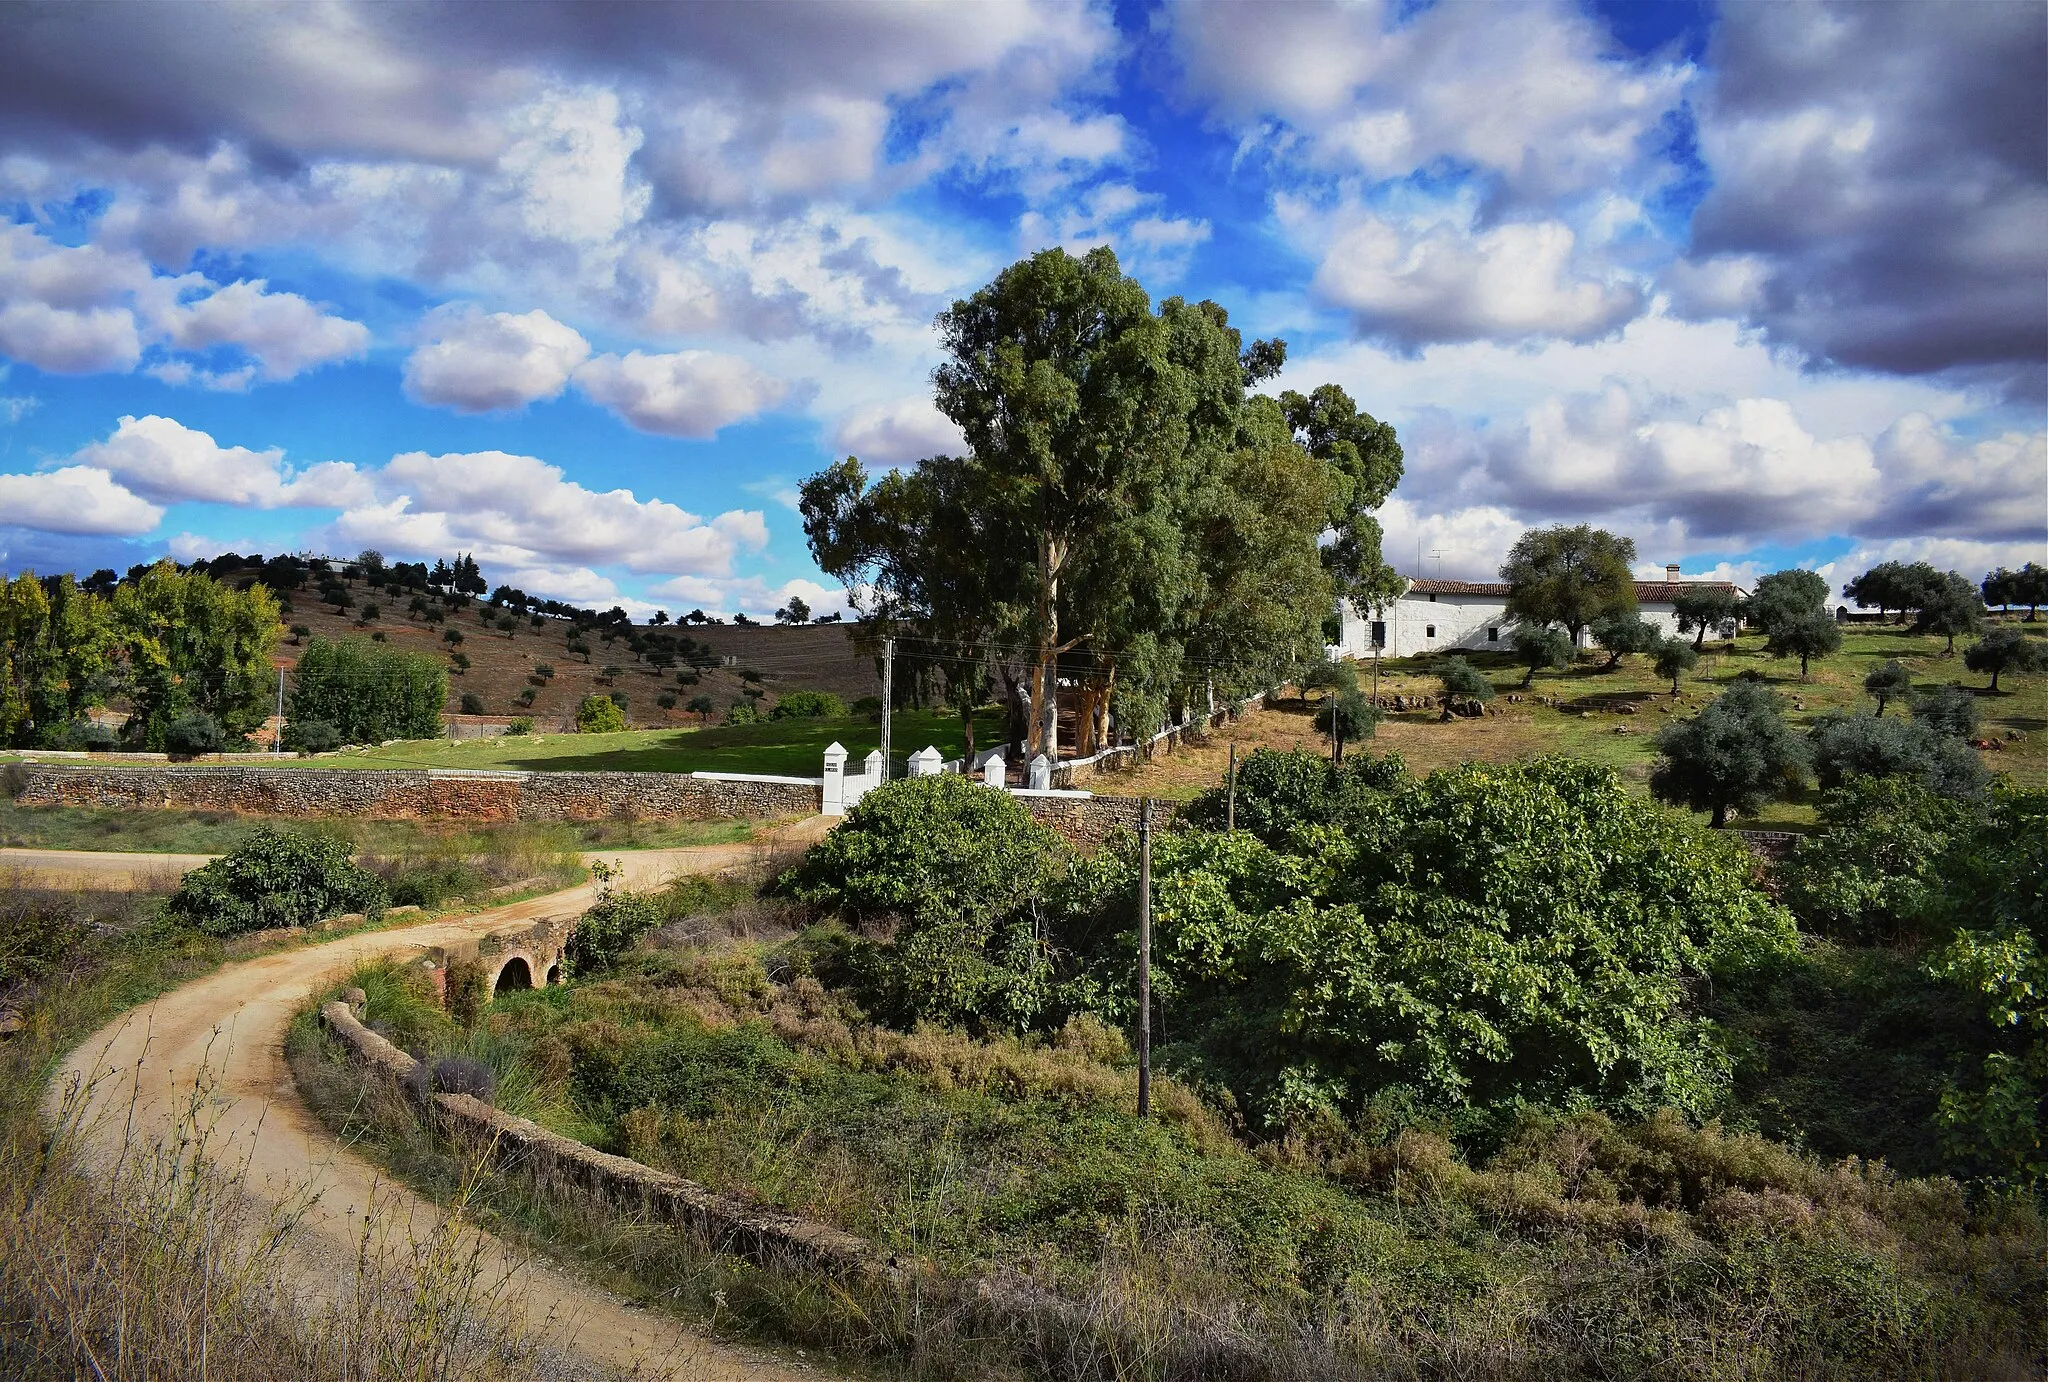 Photo showing: Published with the description: "A village near Zafra, Extremadura. The 'Via de la Plata' is one of the many Pilgrimage routes to Santiago, starting in Seville and continuing northward. "